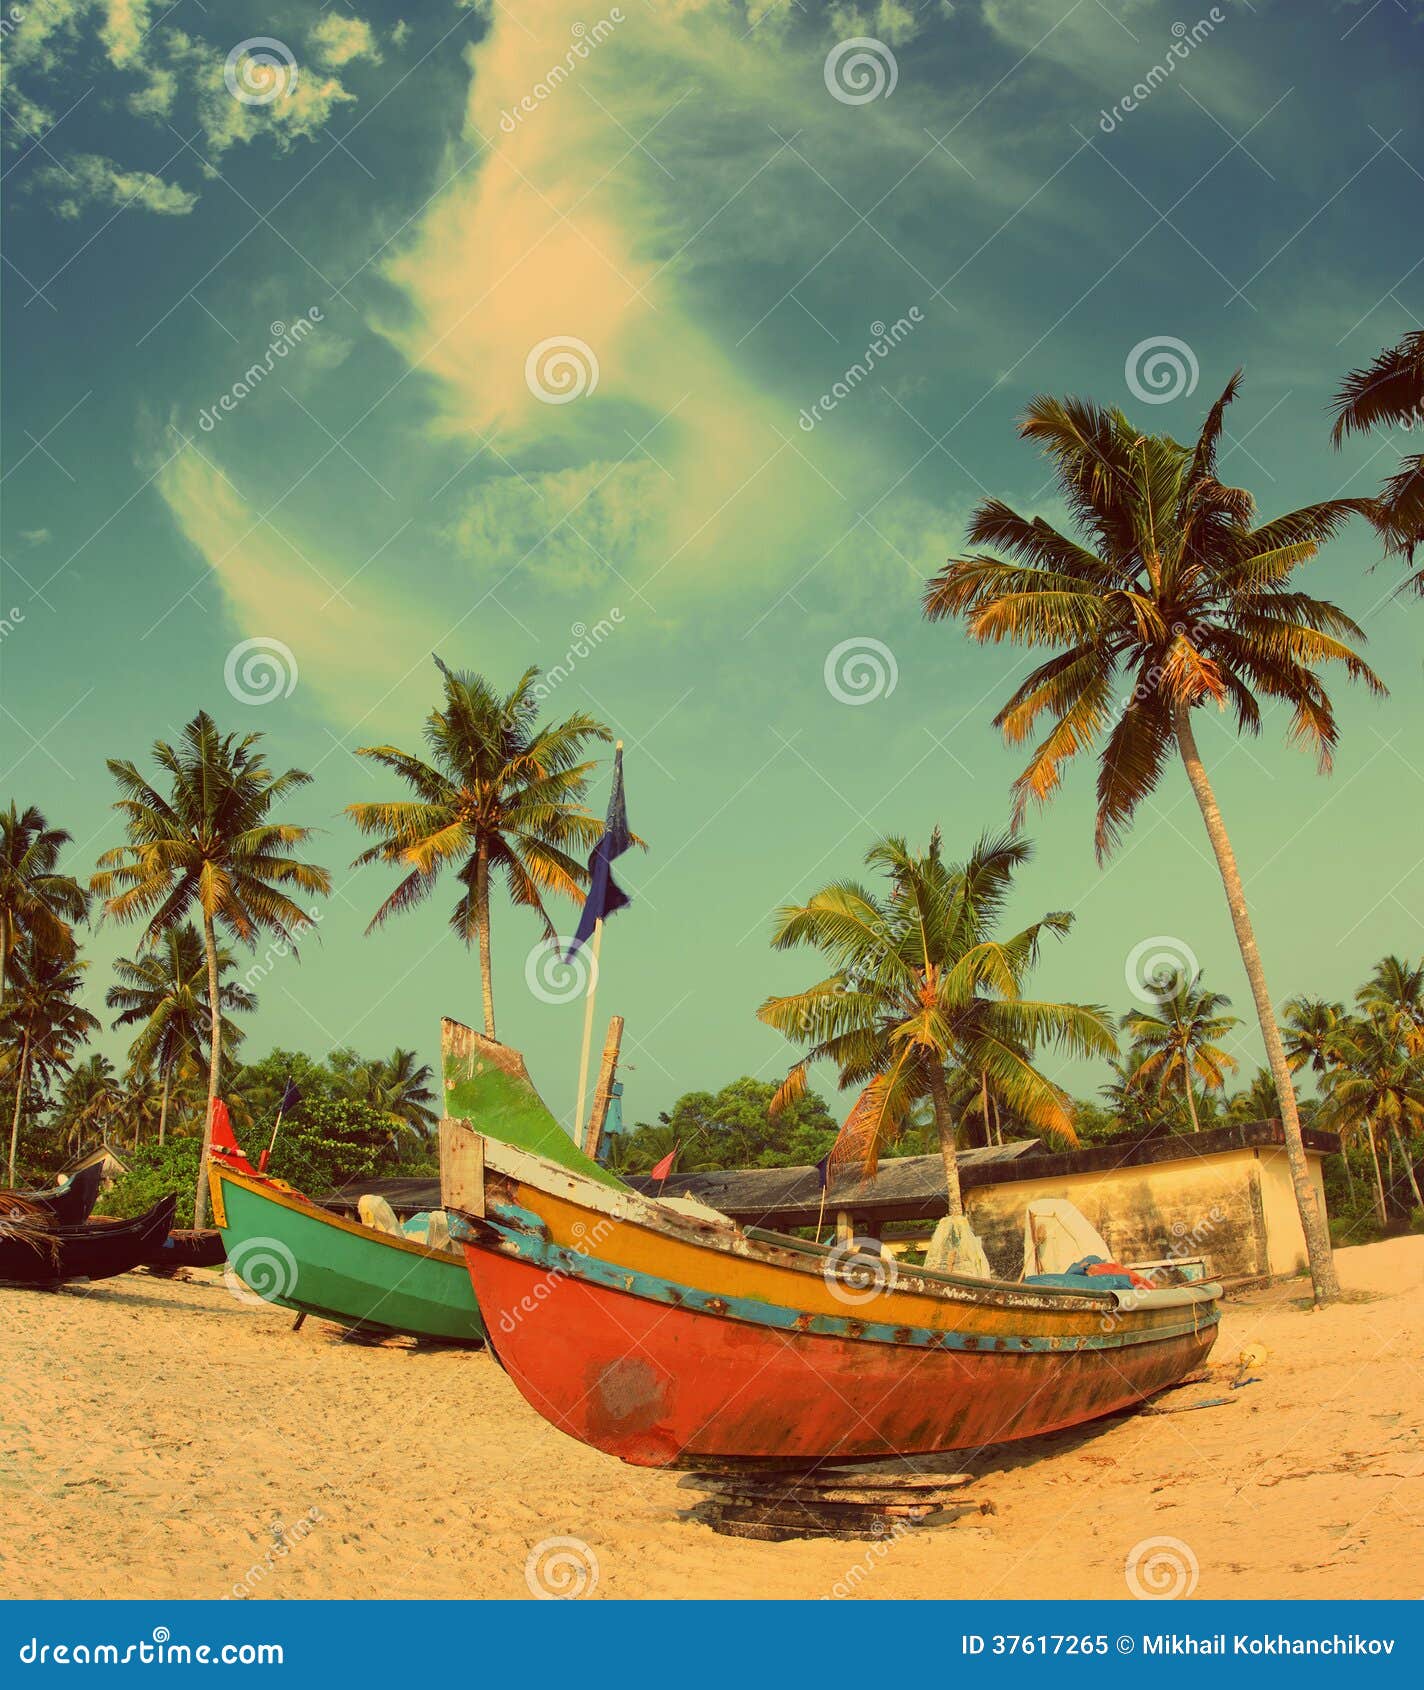 Old Fishing Boats on Beach - Vintage Retro Style Stock Image